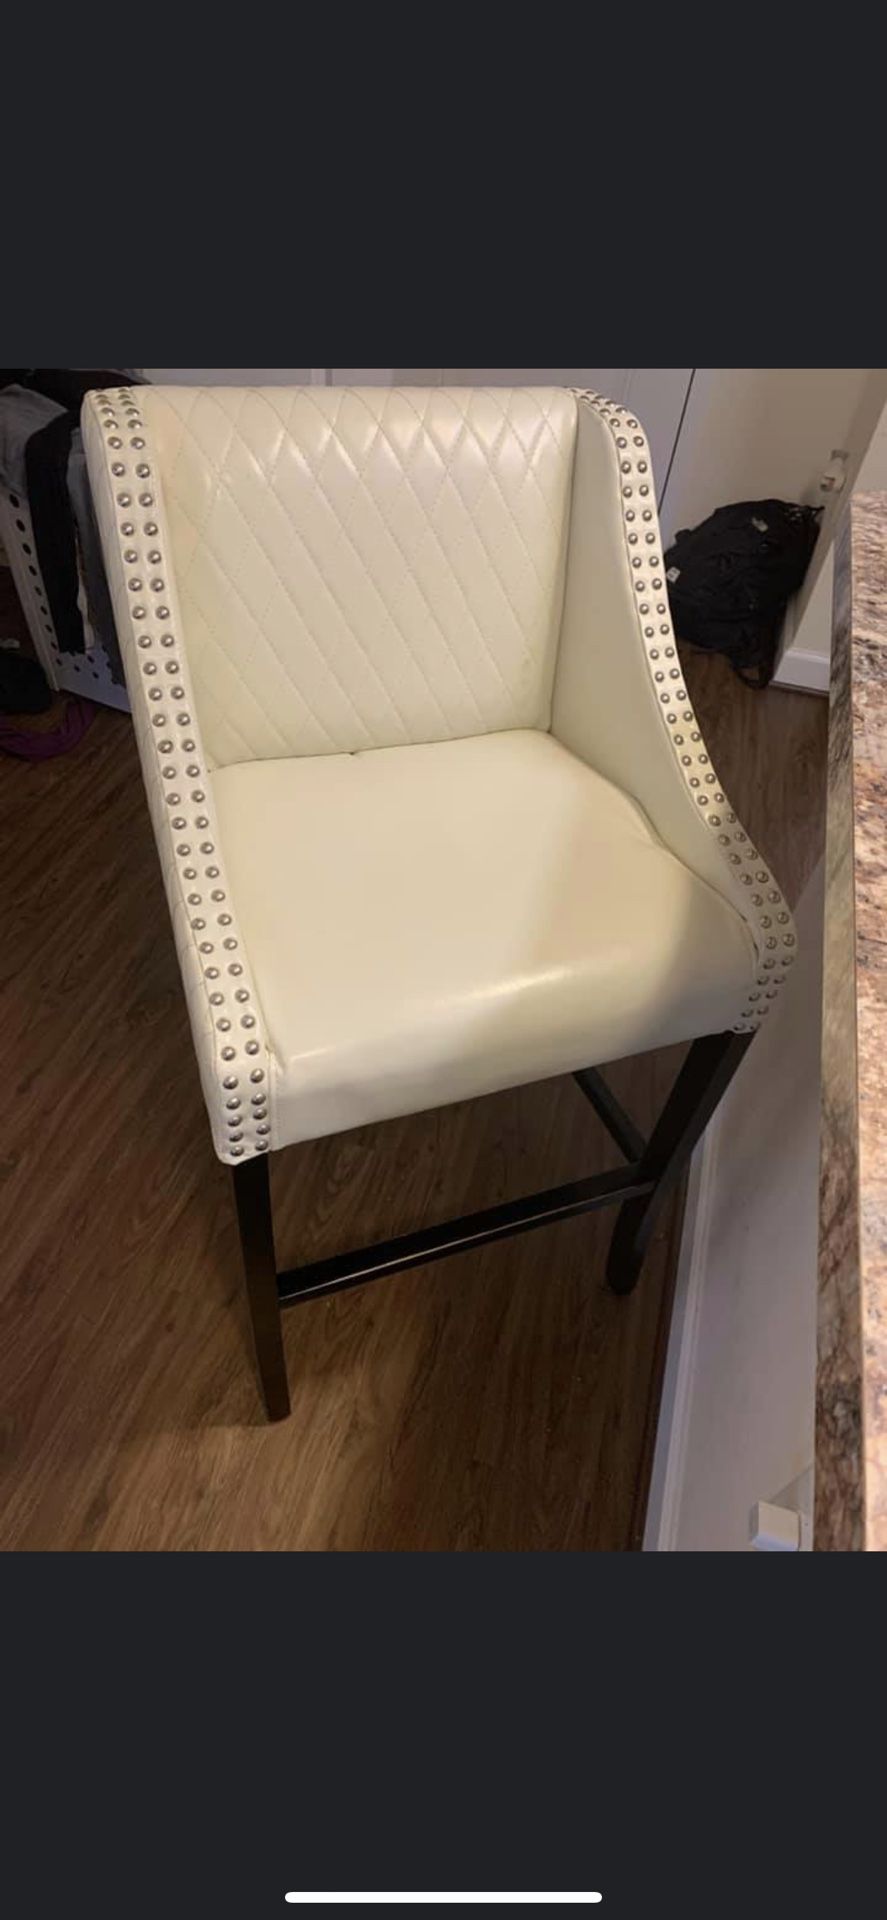 Two cream color bar stool chairs. Used the paint is coming off the foot rest a little line